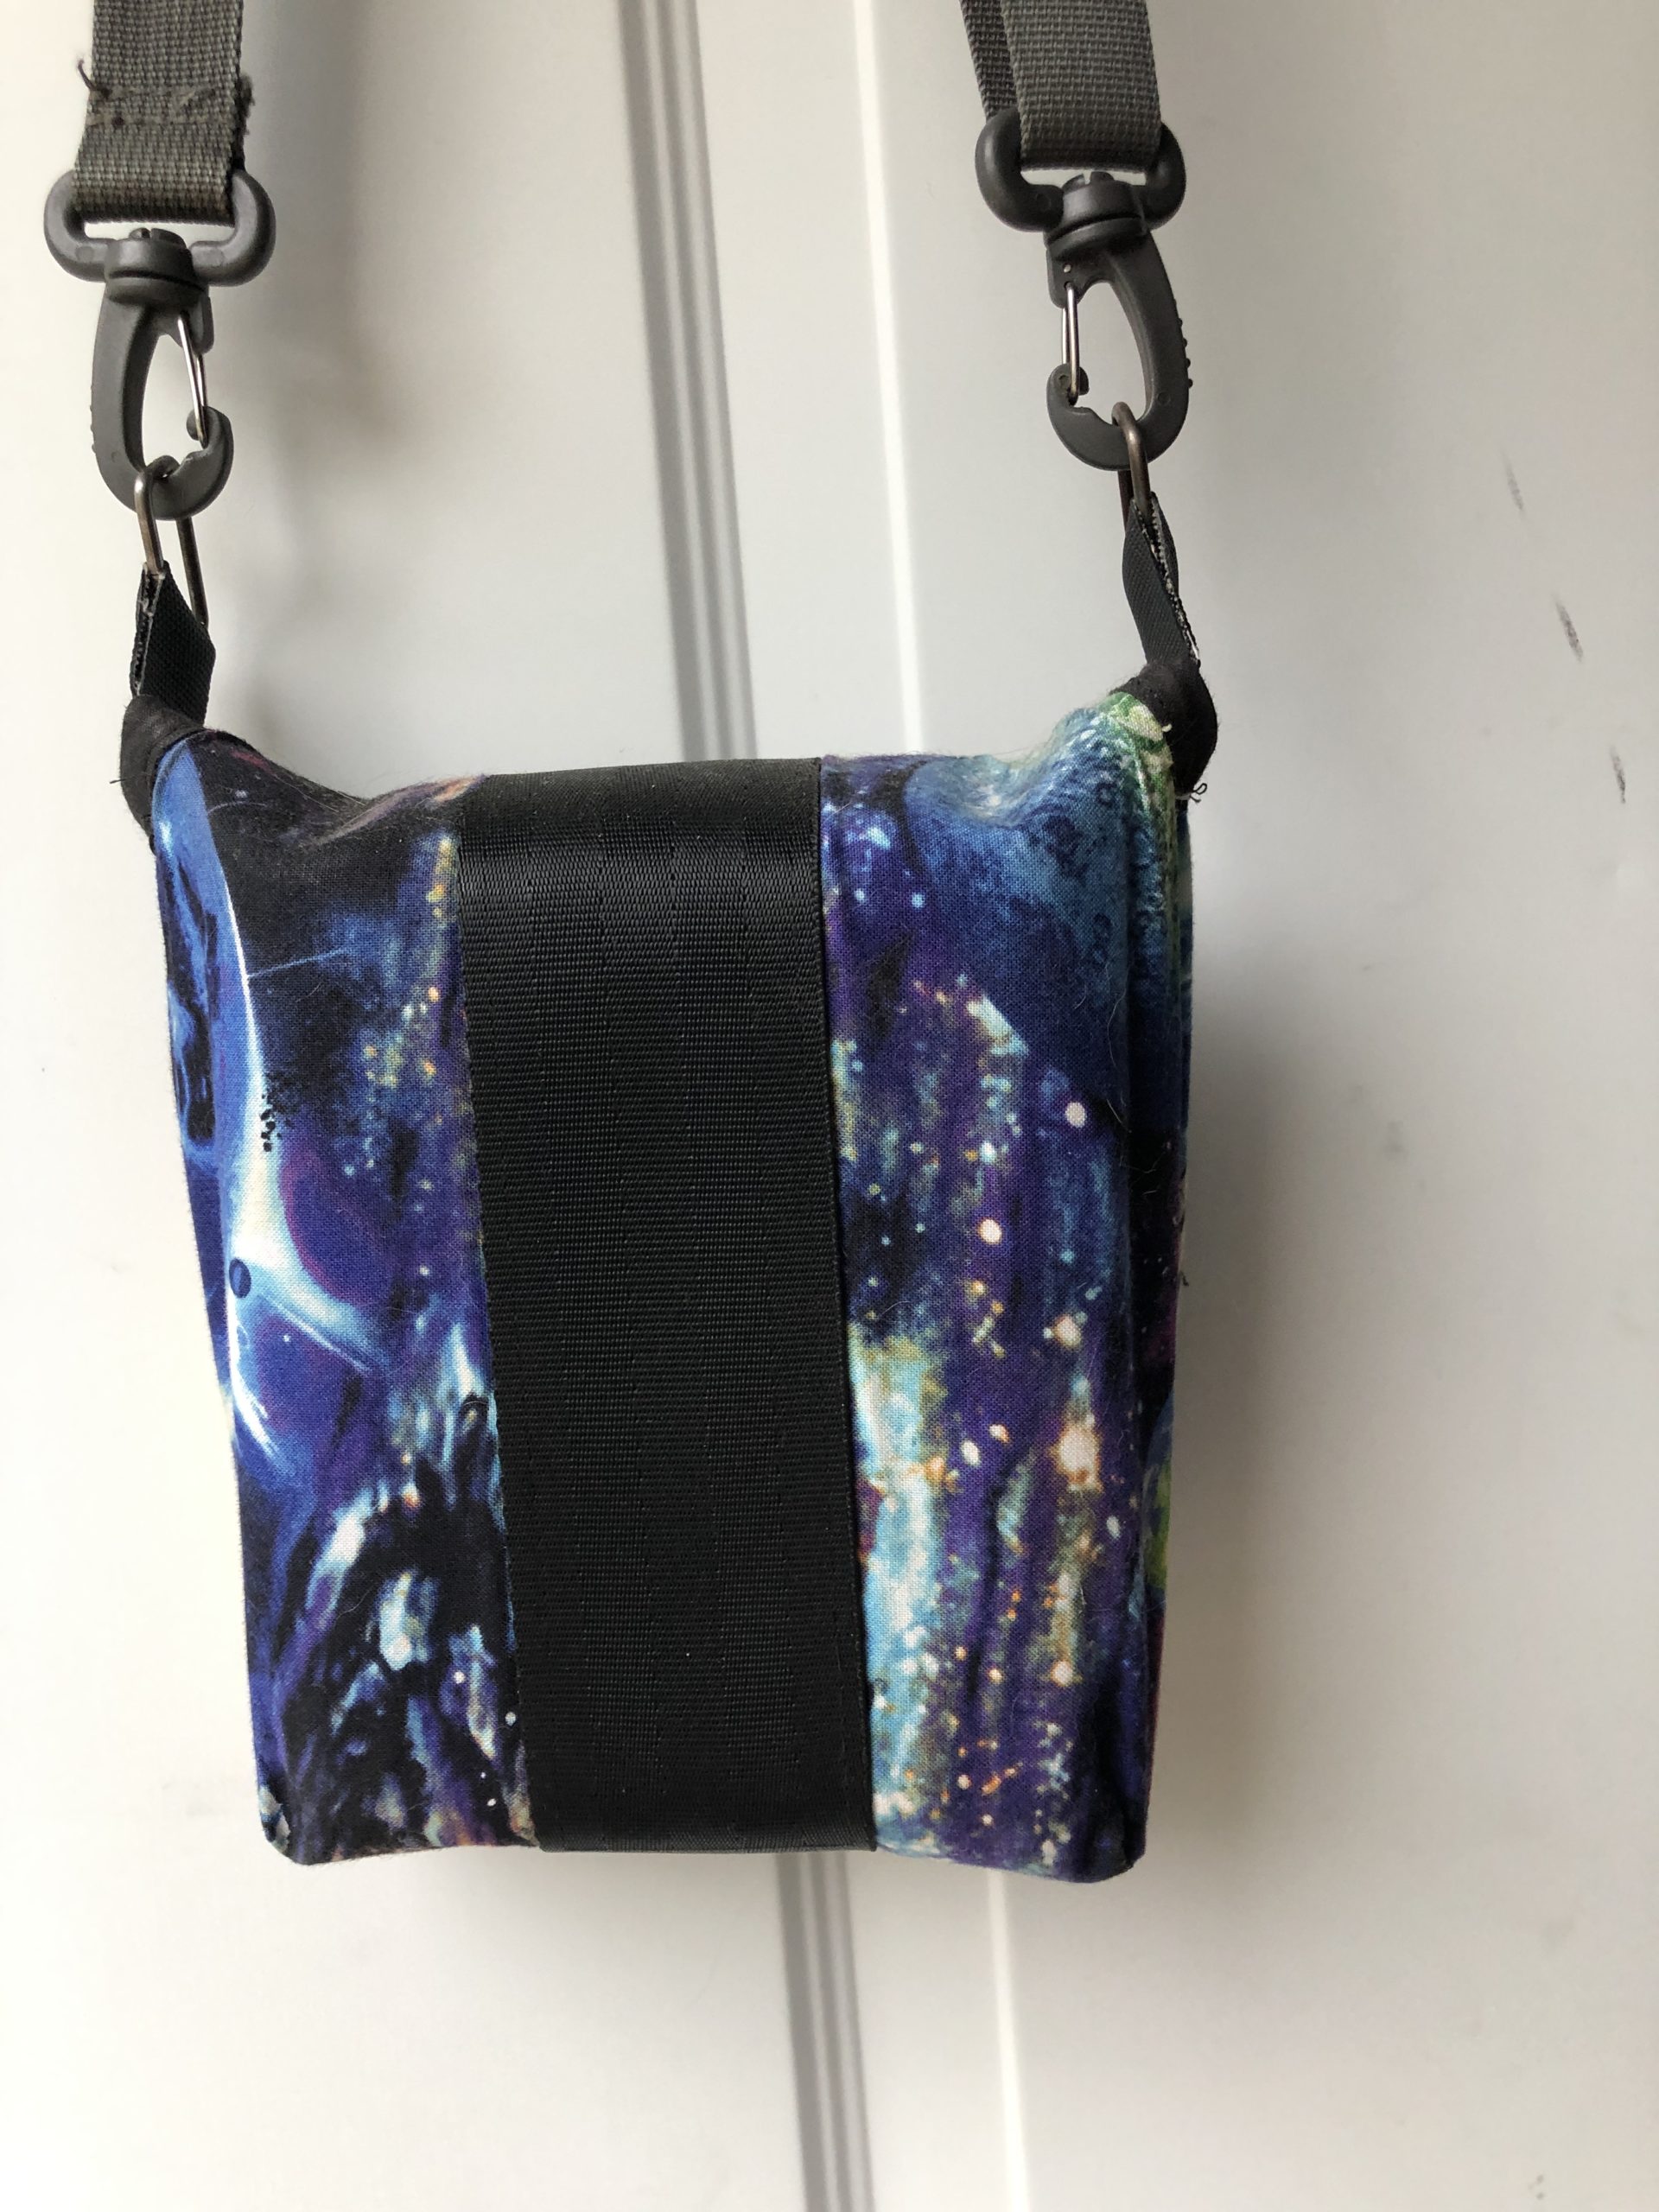 Outer Space bag!